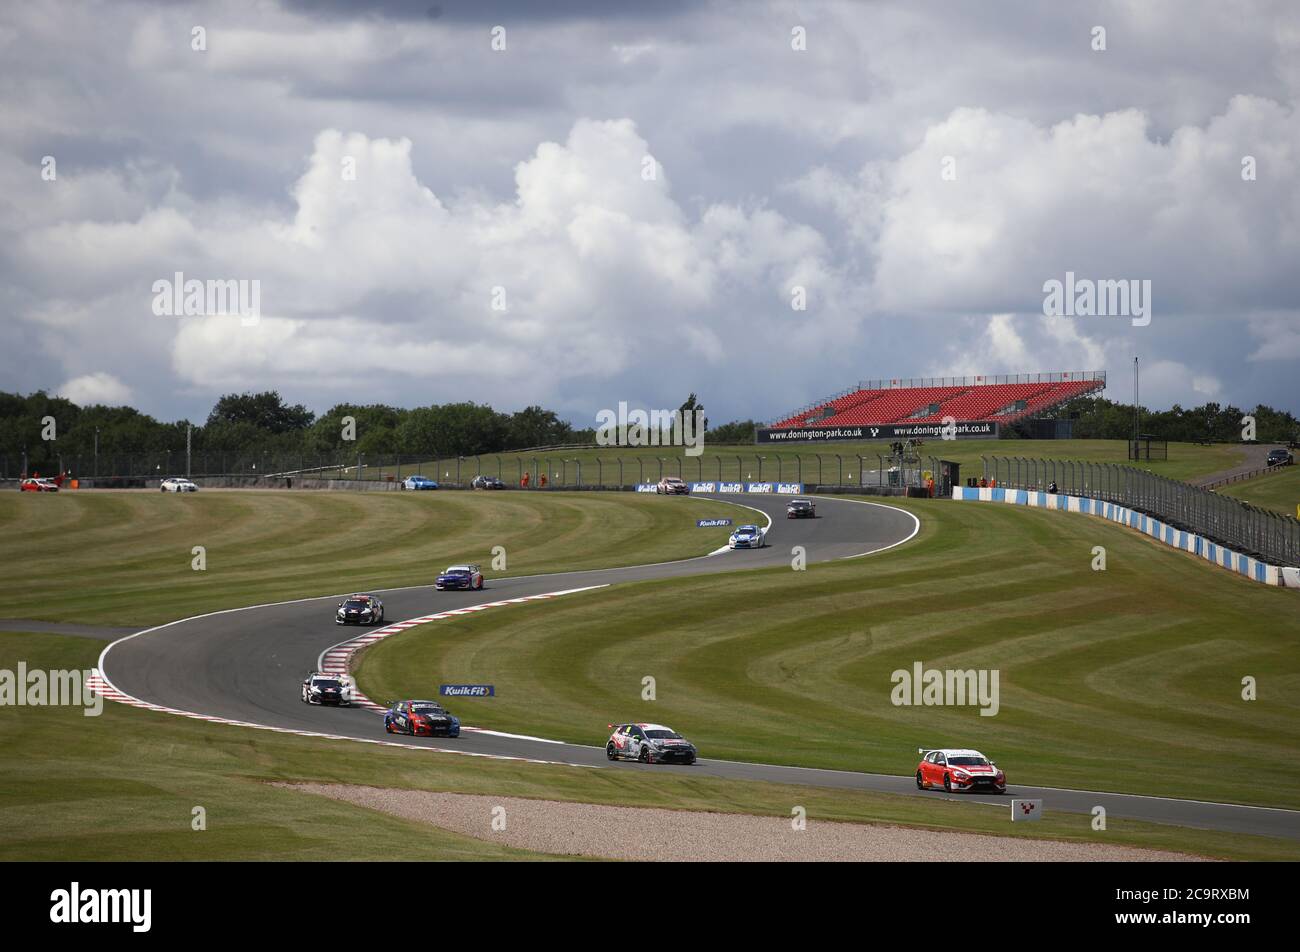 A general view during the second race during the Kwik Fit British Touring Car Championship at Donington Park. Stock Photo